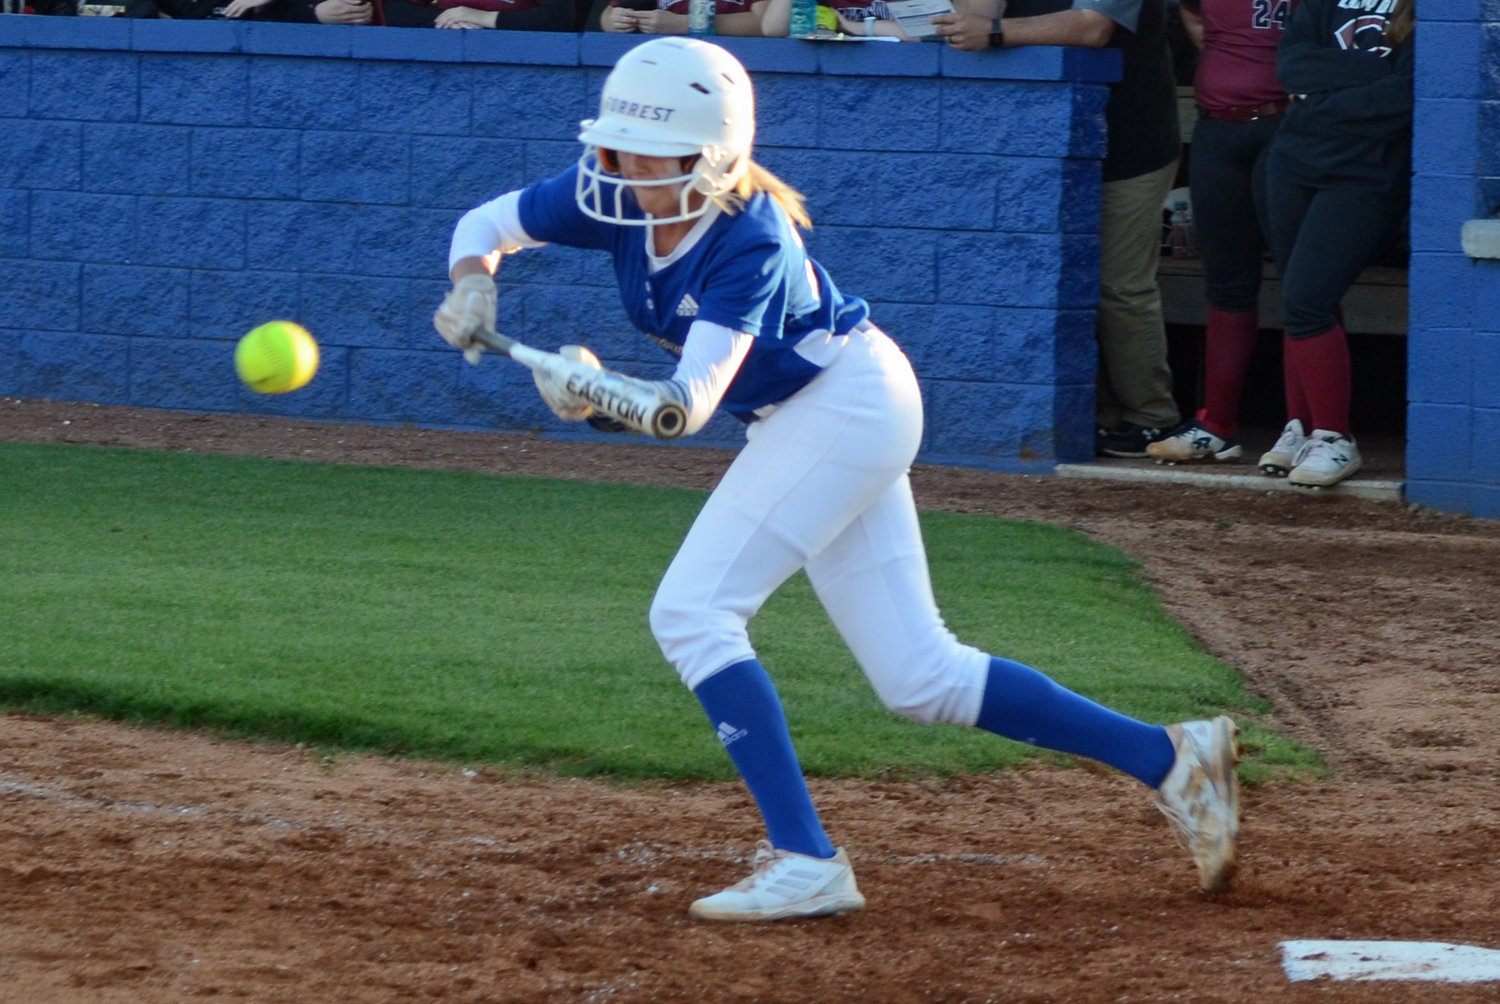 Macyn Kirby lays down a perfect bunt for a base hit in the bottom of the fourth inning.